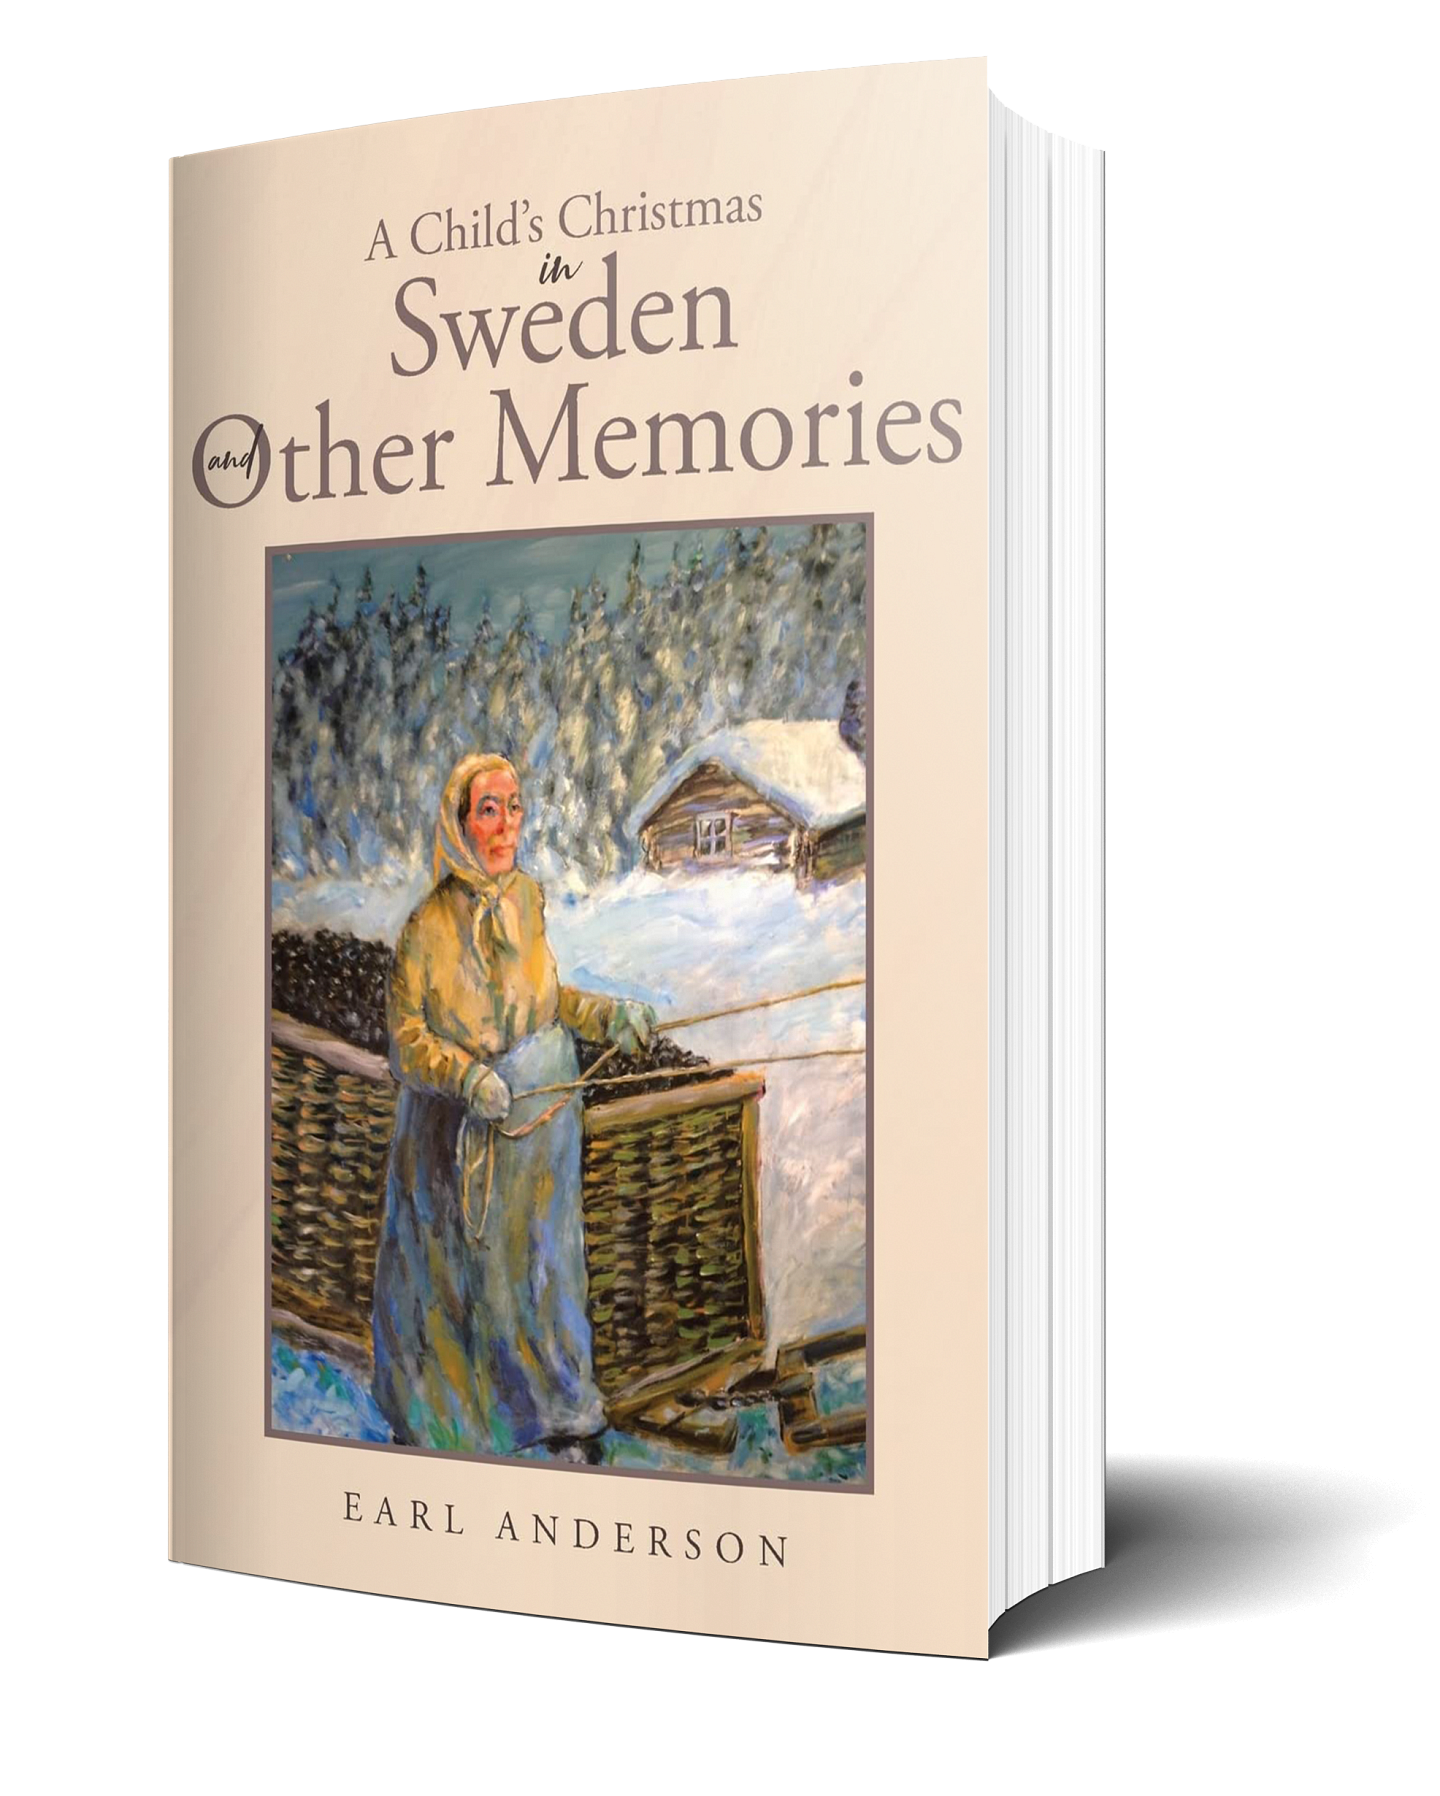 A Child's Christmas in Sweden and Other Memories